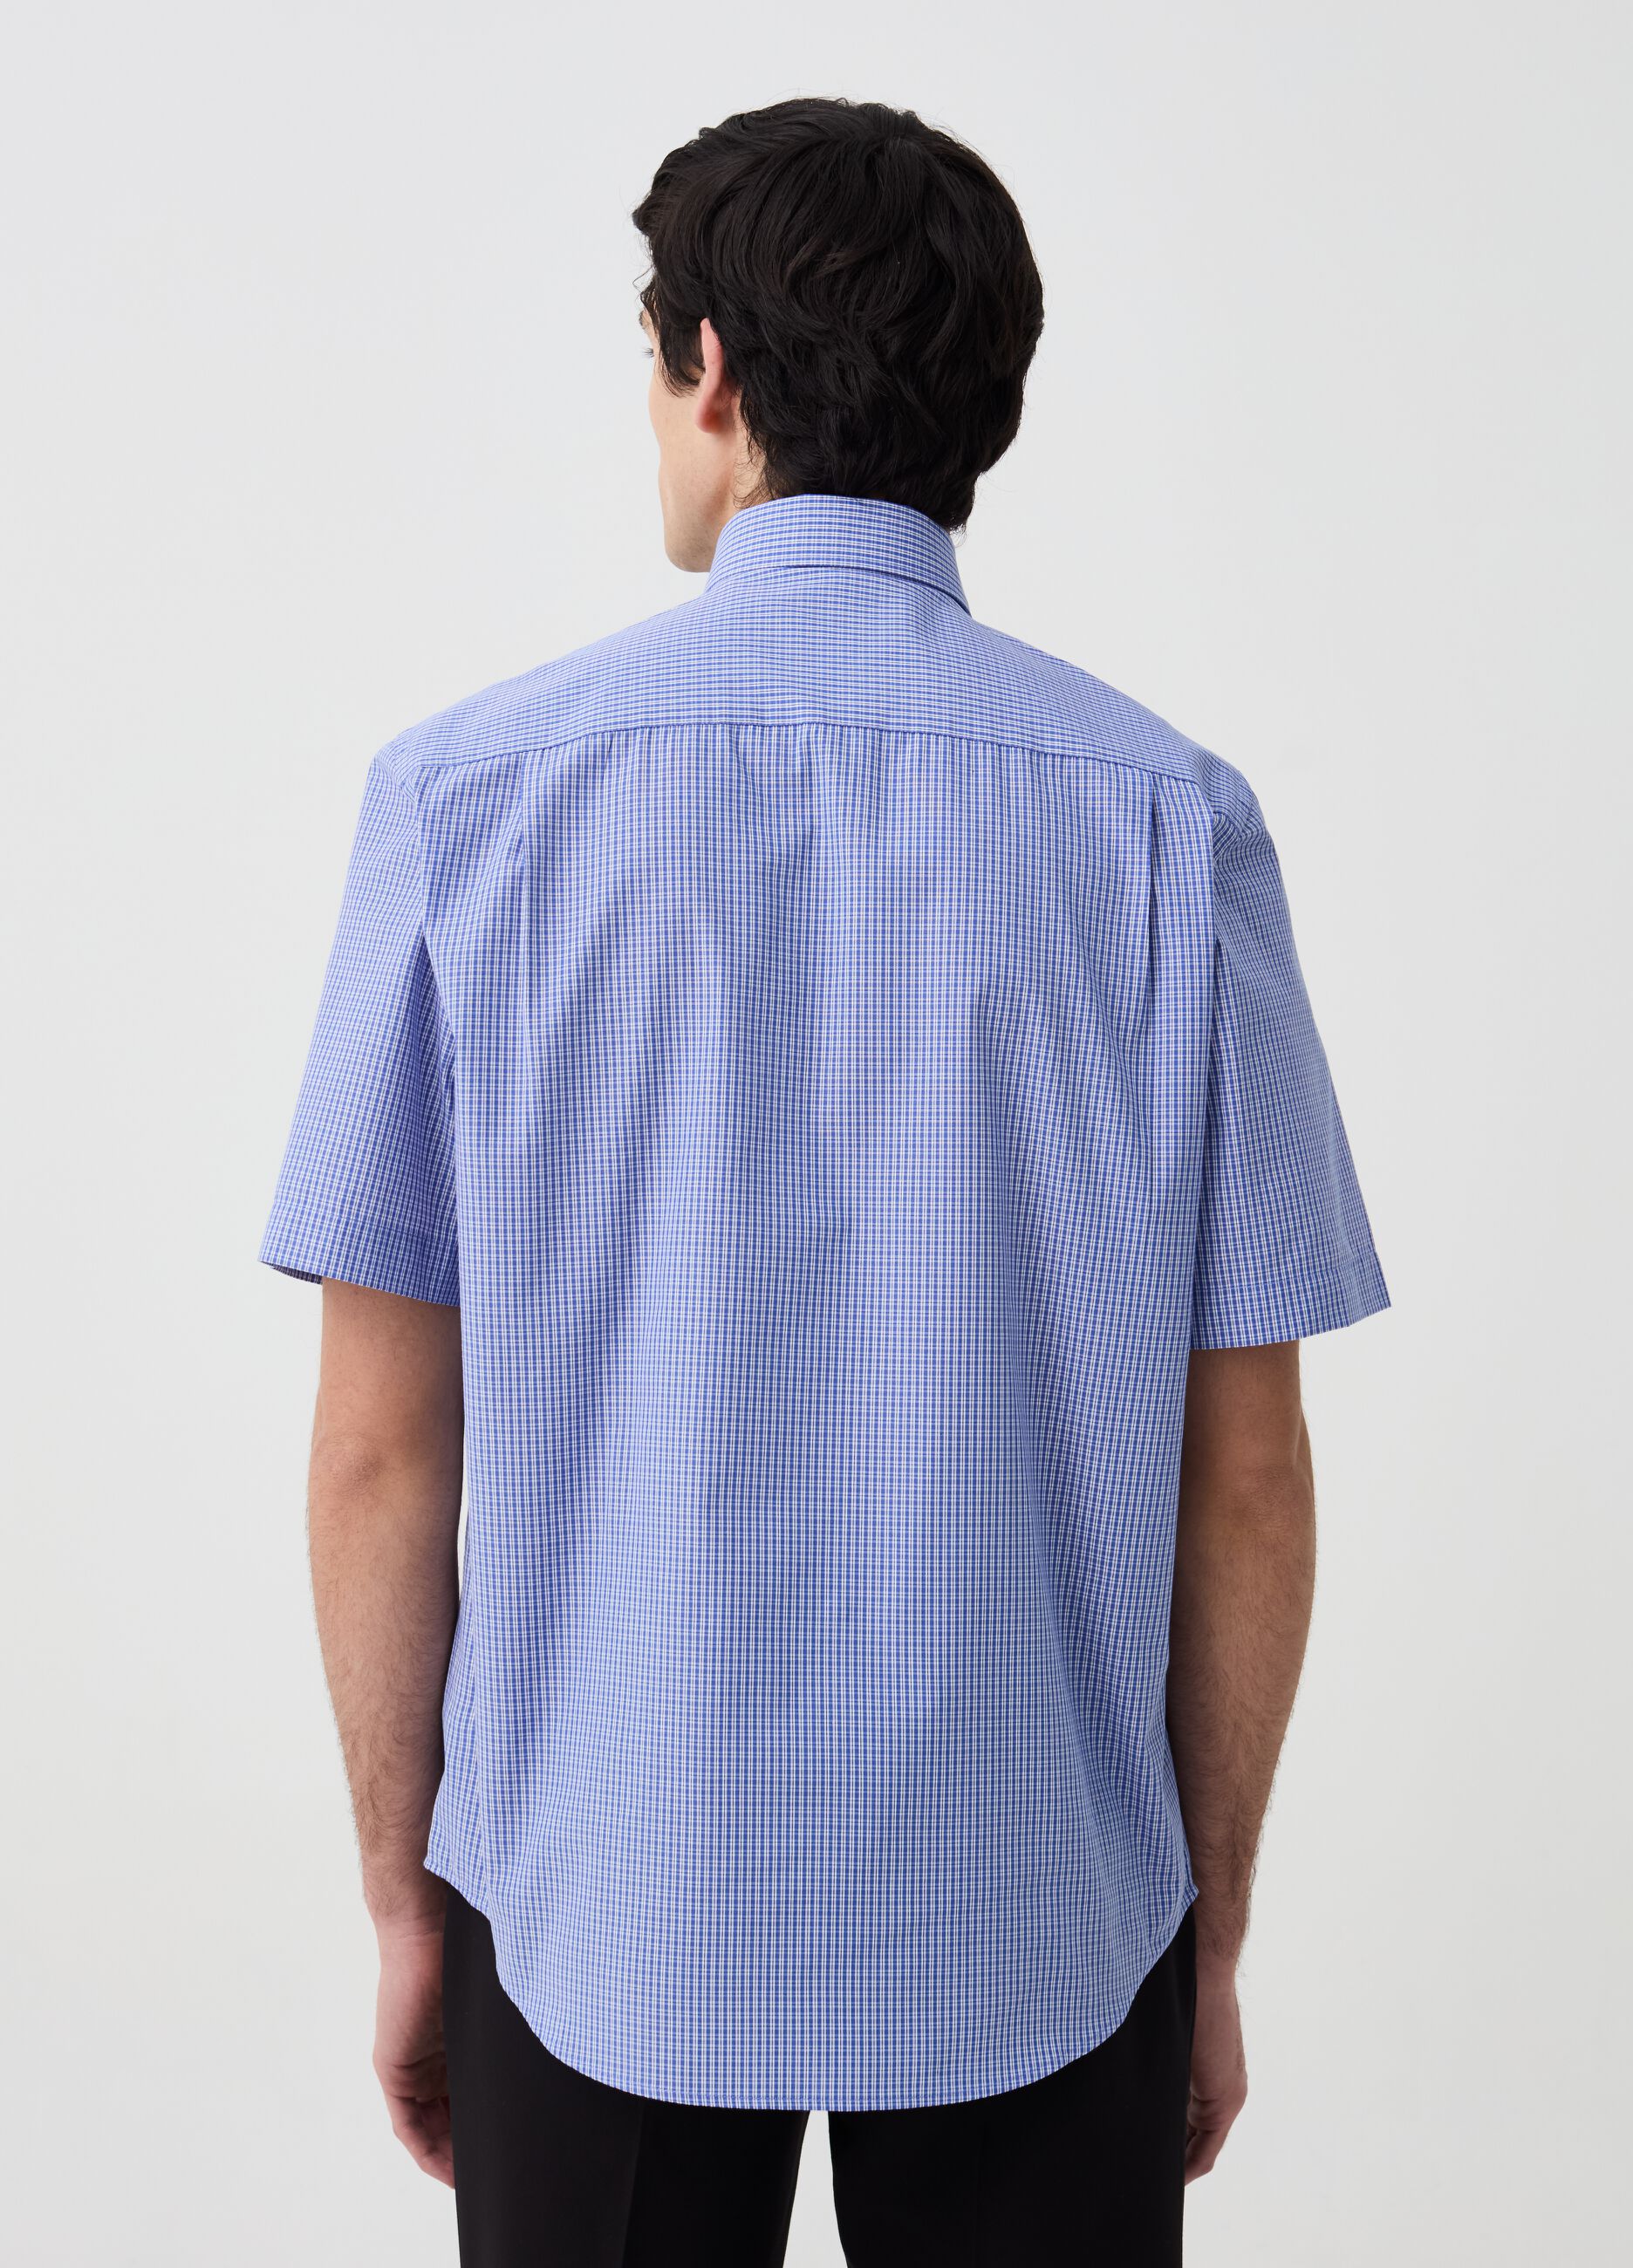 Short-sleeved shirt with micro check pattern